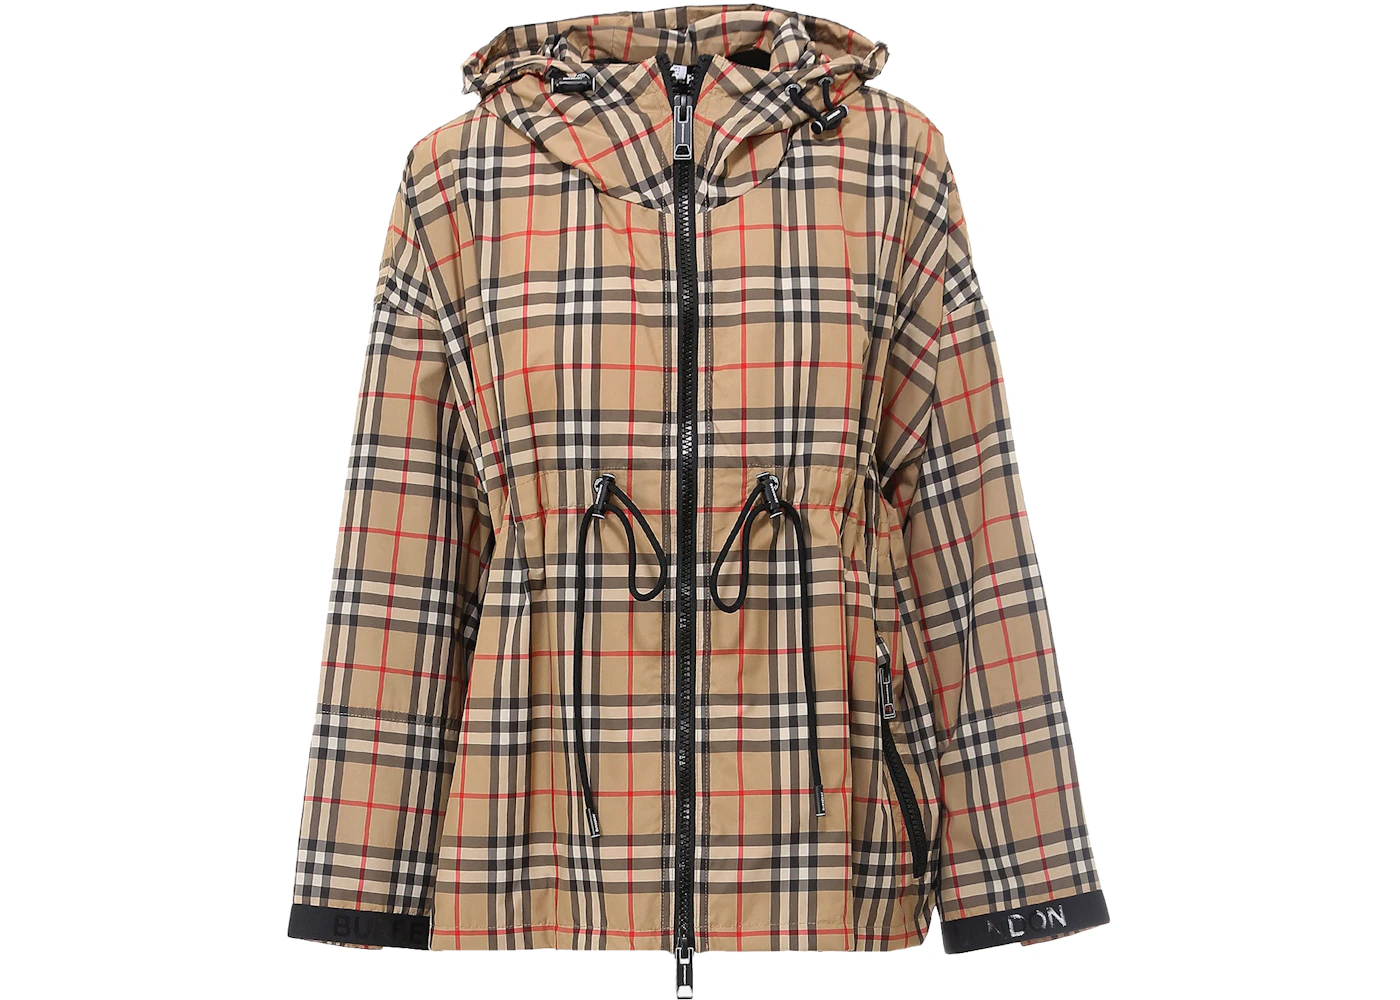 Burberry Women's Traditional Check Print Jacket Beige - FW22 - US